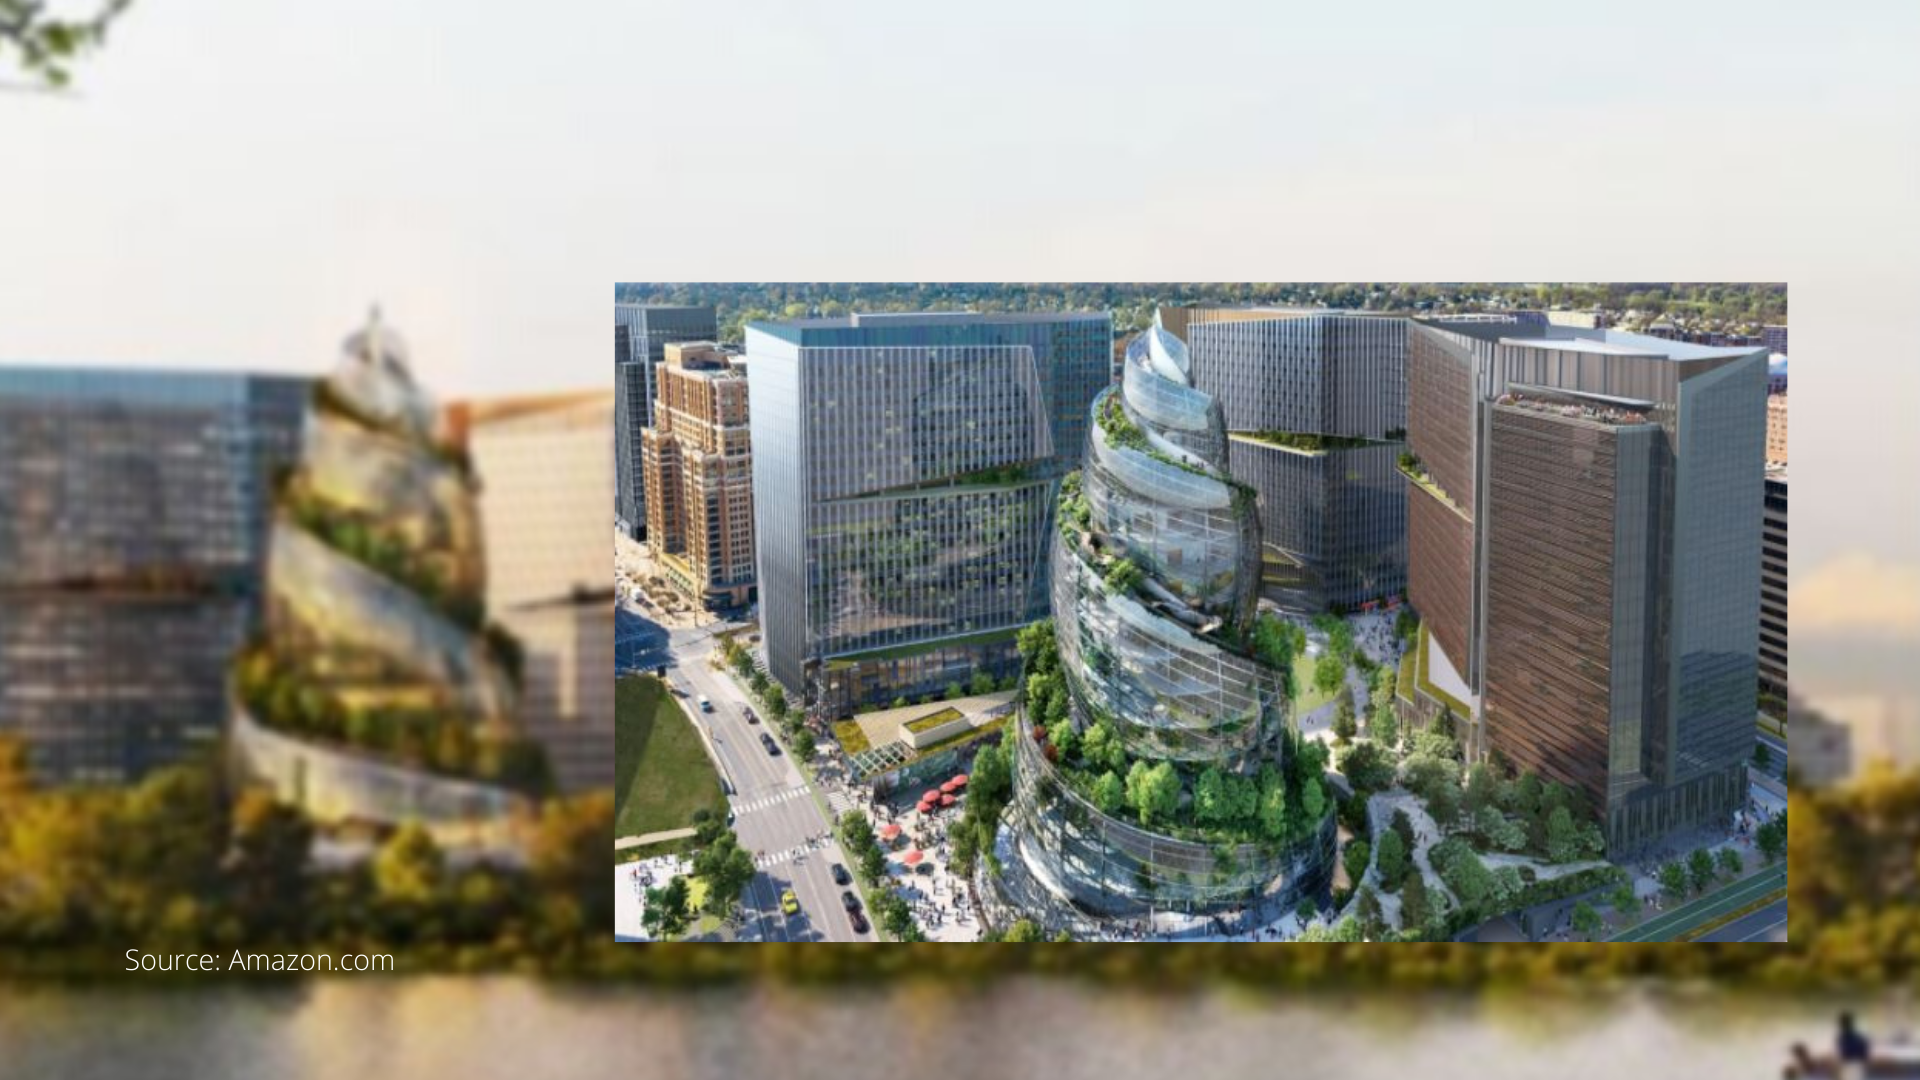 Amazon Unveils the Proposed Design for Their HQ2 and it is Stunning